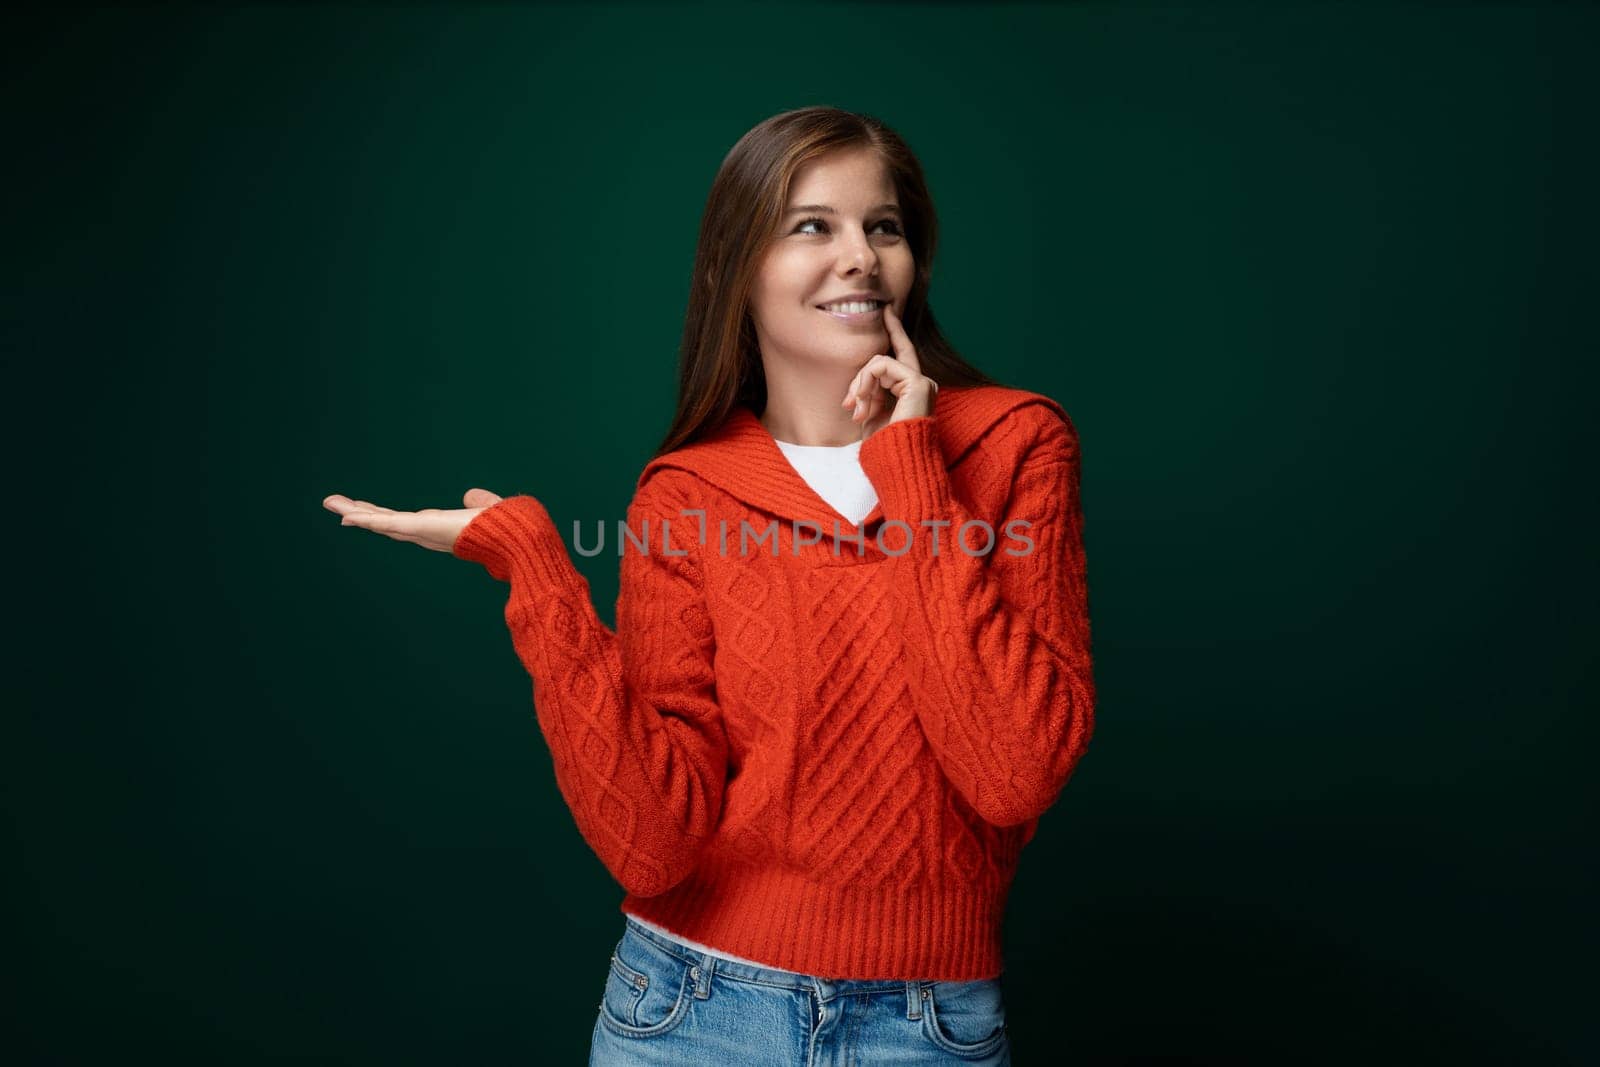 Dreamy 30 year old woman with brown hair in a red sweater on a green dark background by TRMK